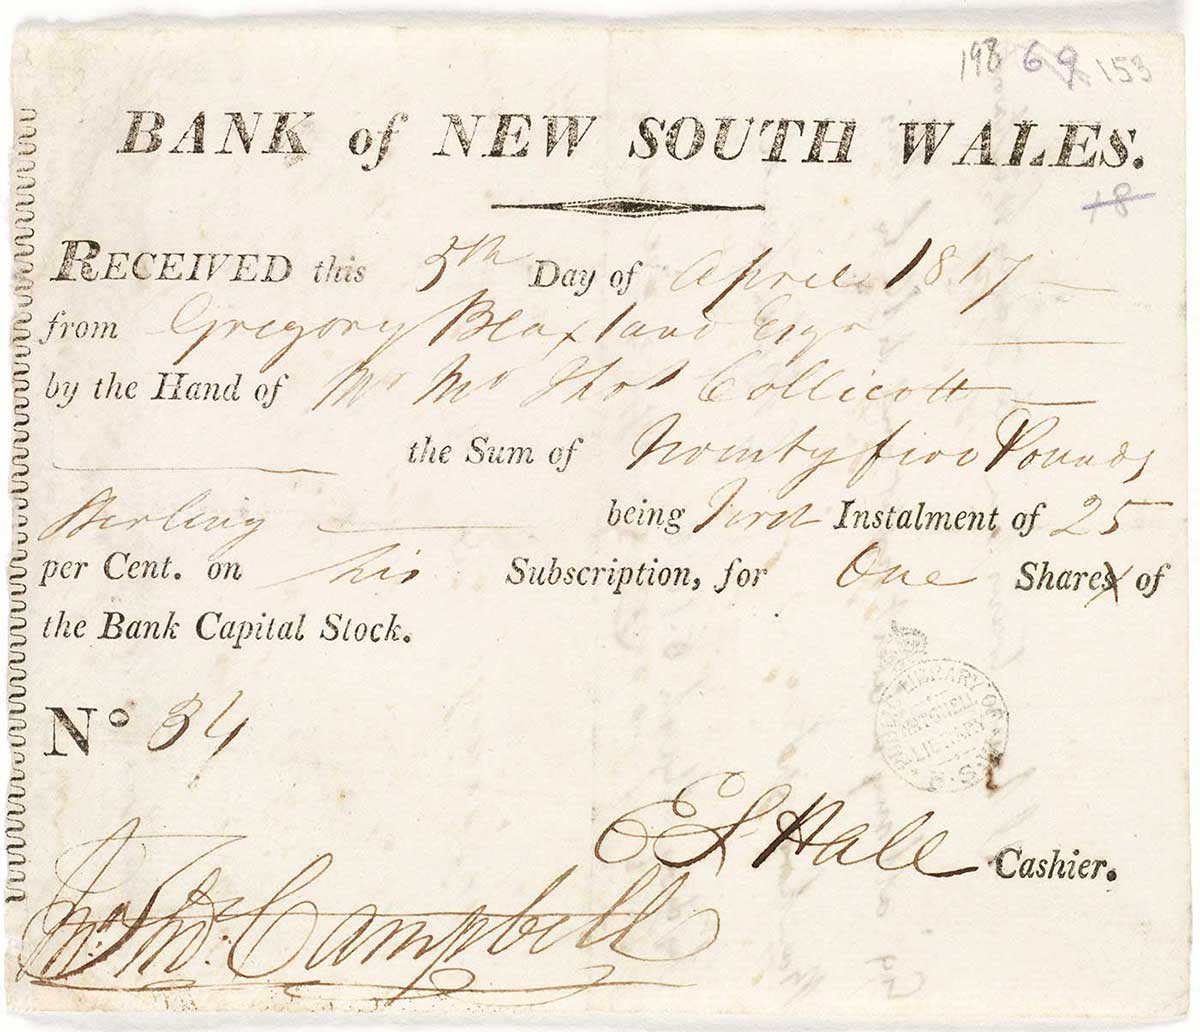 Printed document headed Bank of New South Wales with spaces below to be filled in by hand as necessary. These include the date, who paid the money, how much the receipt is for, in this case 25 pounds, and so on.